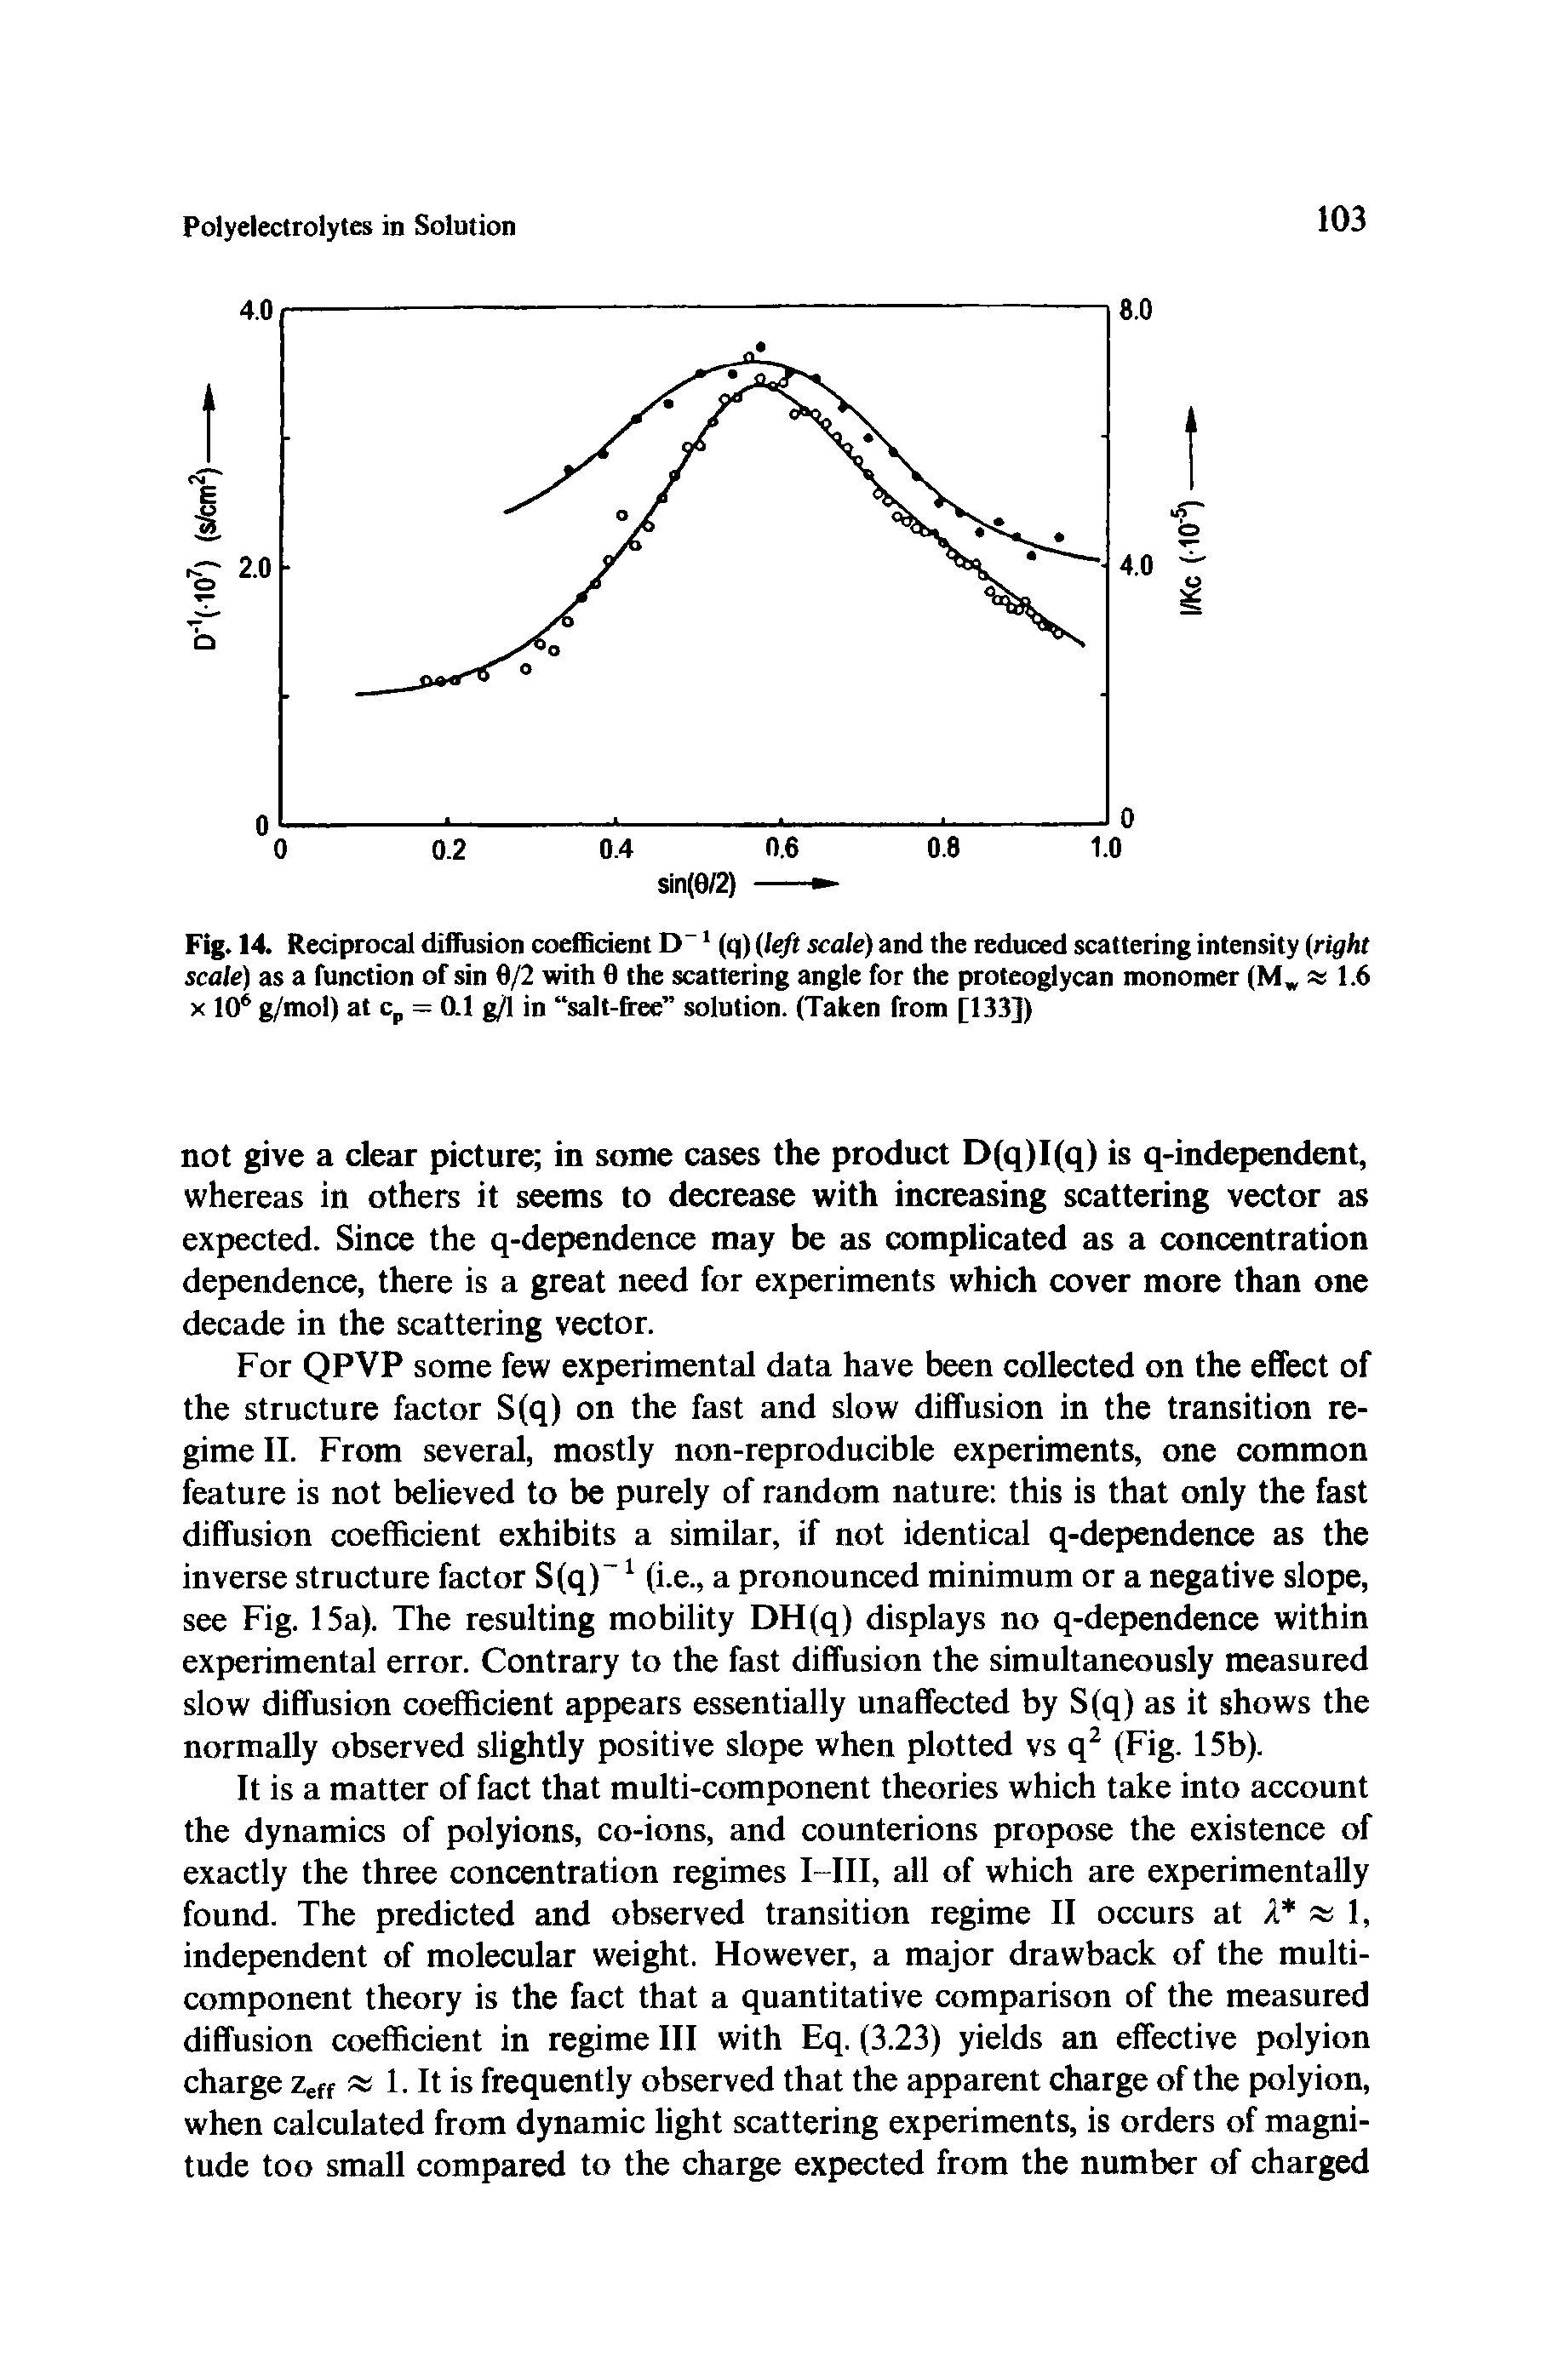 Fig. 14 Reciprocal diflusion coeflBcient D (q) left scale) and the reduced scattering intensity (right scale) as a function of sin 9/2 with 0 the scattering angle for the proteoglycan monomer (M, 1.6 X 10 g/mol) at Cp = 0.1 g/1 in salt-free solution. (Taken from [133])...